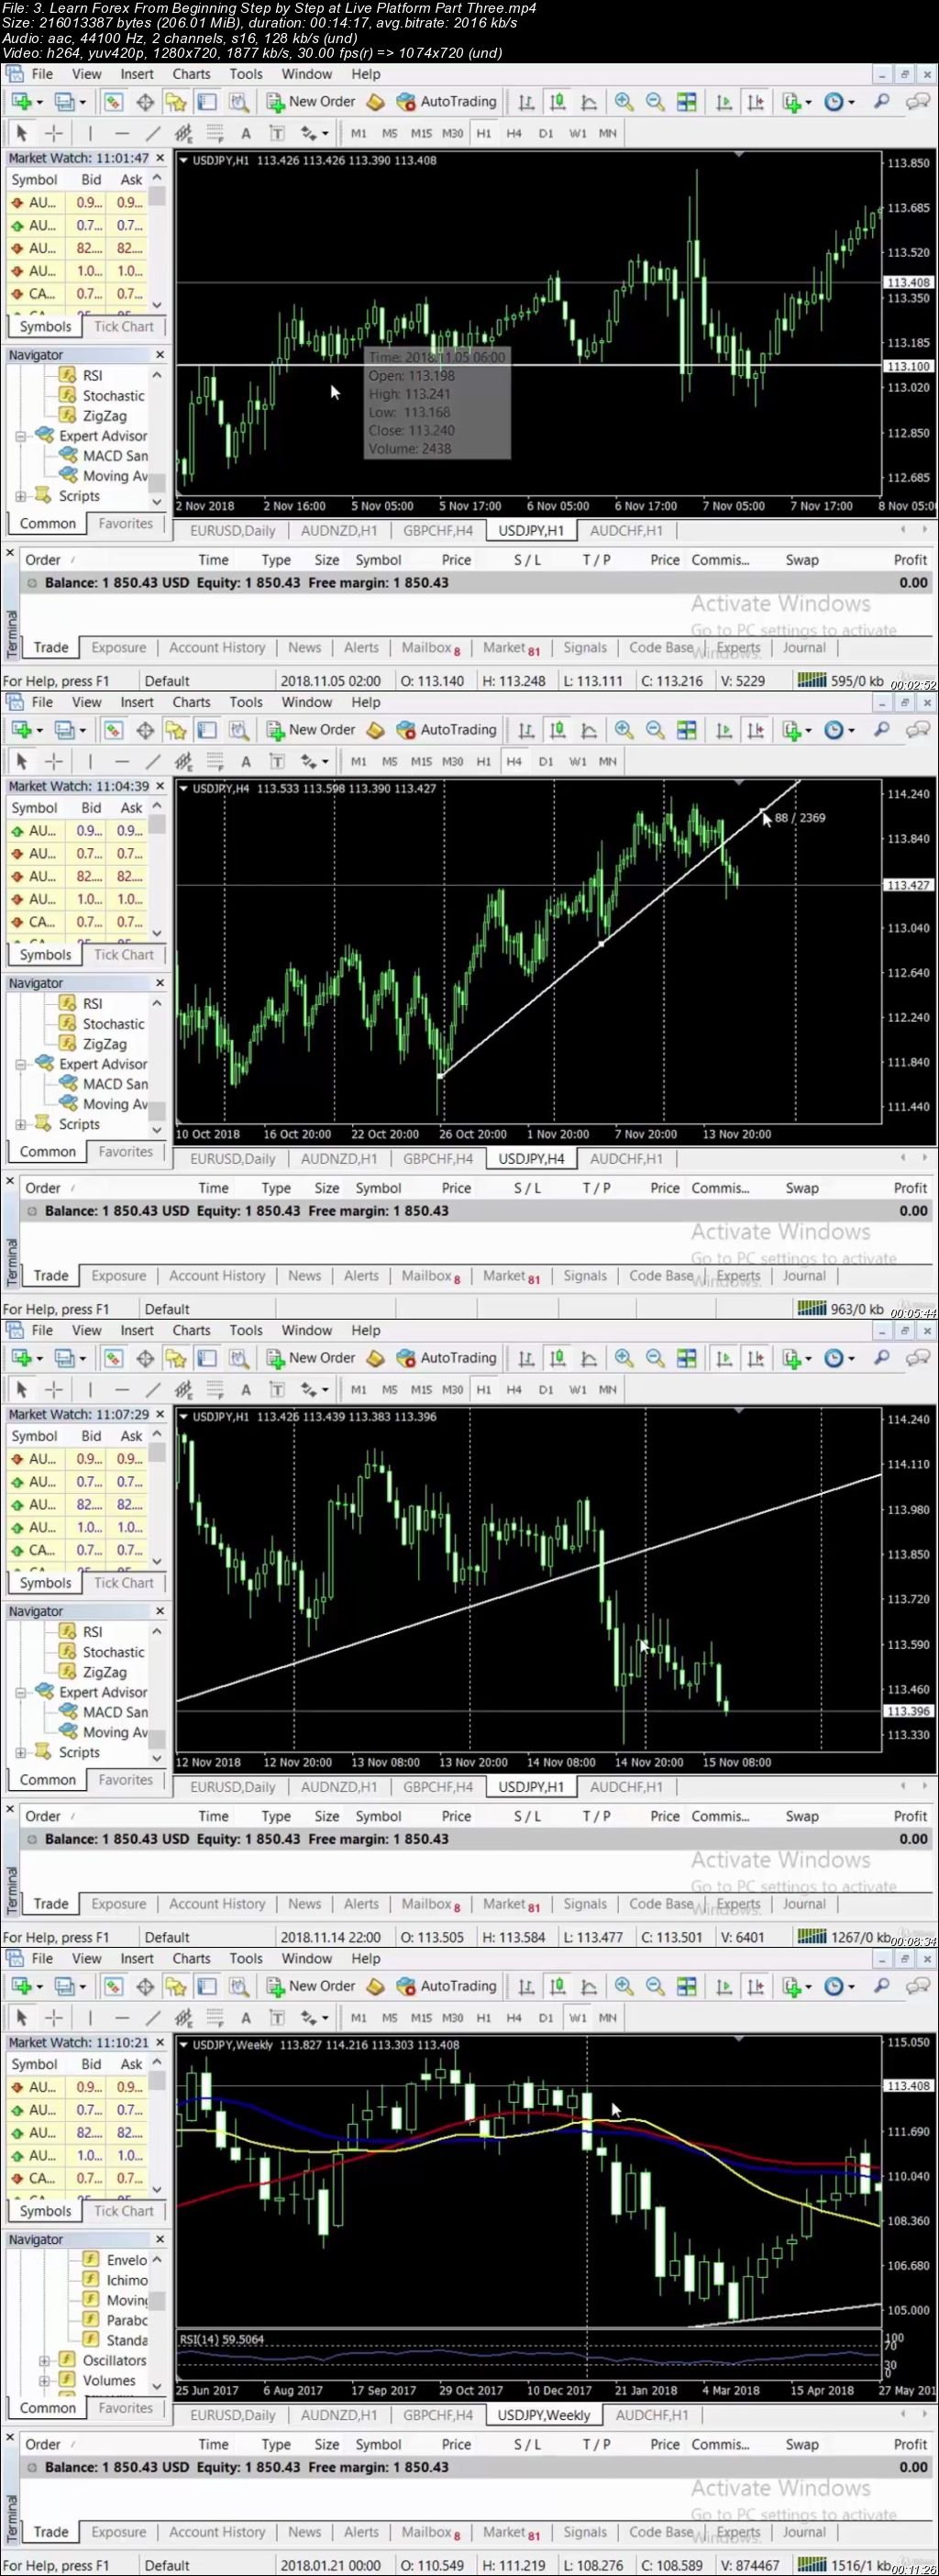 Download Complete Forex Trading At Price Action Tricks And Tips - 